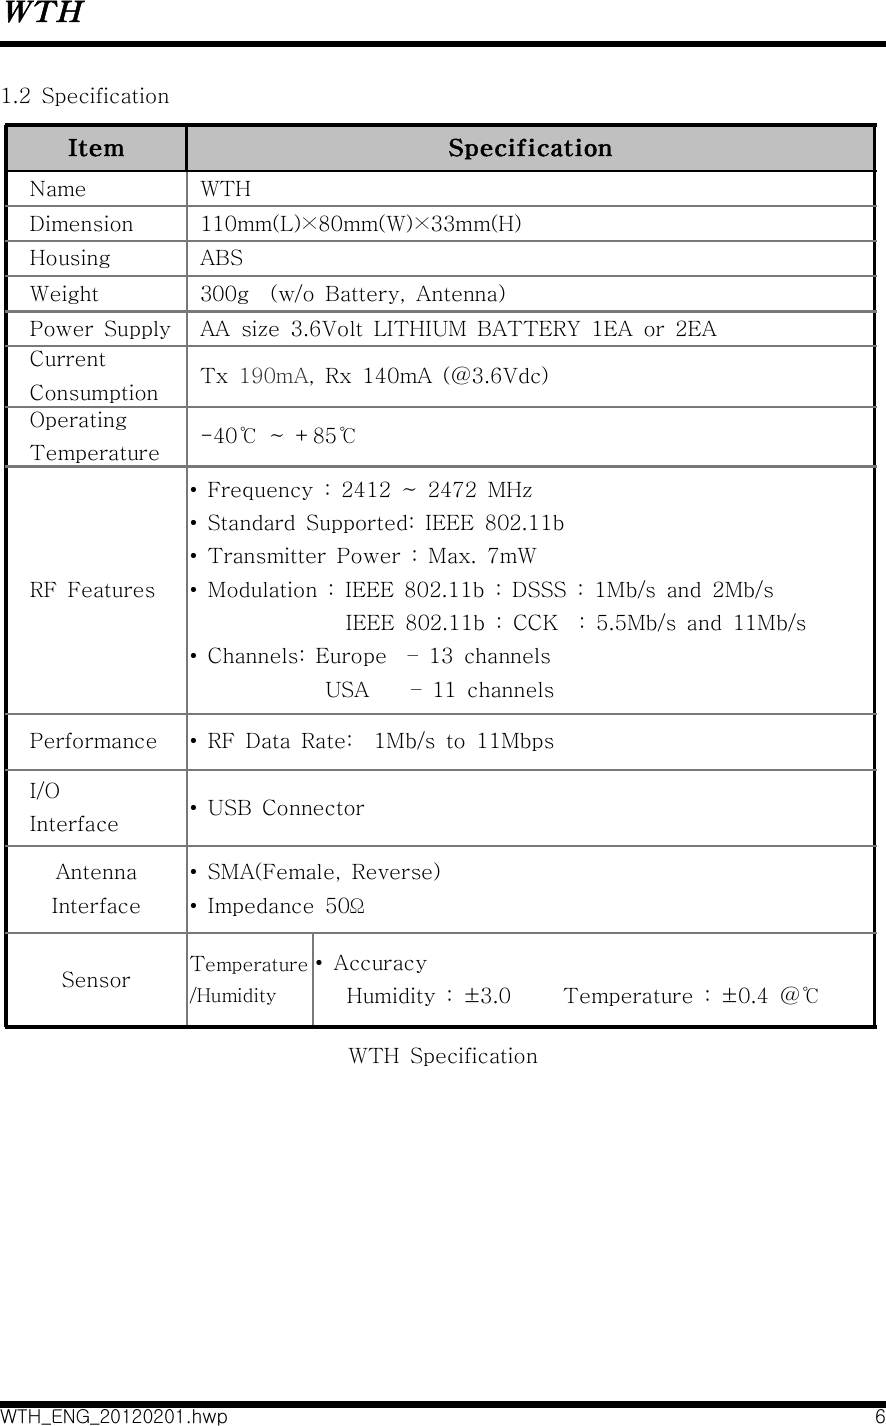 WTHWTH_ENG_20120201.hwp 61.2  SpecificationItem Specification    Name   WTH    Dimension   110mm(L)×80mm(W)×33mm(H)    Housing   ABS    Weight   300g    (w/o  Battery,  Antenna)    Power  Supply   AA  size  3.6Volt  LITHIUM  BATTERY  1EA  or  2EA     Current    Consumption  Tx  190mA,  Rx  140mA  (@3.6Vdc)    Operating    Temperature   -40℃  ~  +85℃    RF  Features•  Frequency  :  2412  ~  2472  MHz•  Standard  Supported:  IEEE  802.11b•  Transmitter  Power  :  Max.  7mW•  Modulation  :  IEEE  802.11b  :  DSSS  :  1Mb/s  and  2Mb/s                              IEEE  802.11b  :  CCK    :  5.5Mb/s  and  11Mb/s•  Channels:  Europe    –  13  channels                          USA        –  11  channels    Performance •  RF  Data  Rate:    1Mb/s  to  11Mbps    I/O     Interface •  USB  ConnectorAntennaInterface•  SMA(Female,  Reverse)•  Impedance  50ΩSensor Temperature/Humidity•  Accuracy       Humidity  :  ±3.0          Temperature  :  ±0.4  @℃WTH  Specification